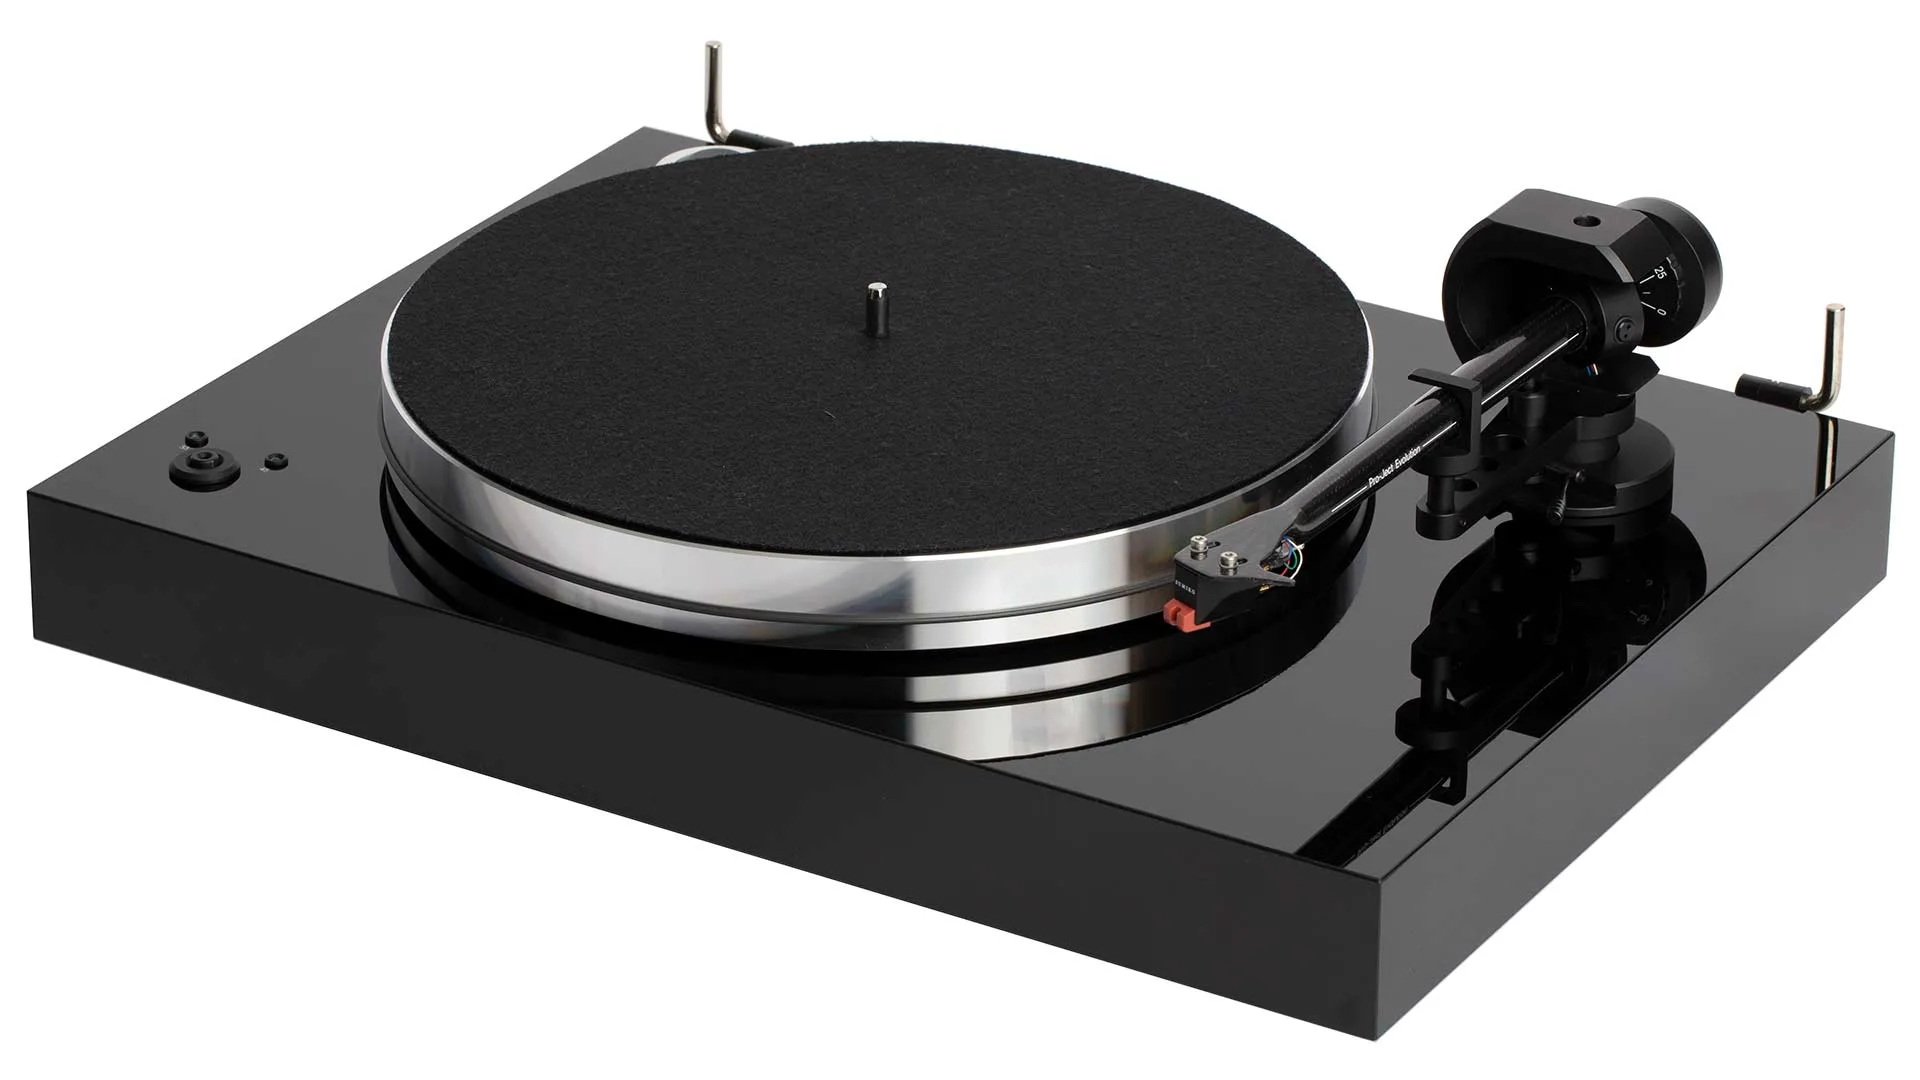 Pro-ject X8 Evolution turntable